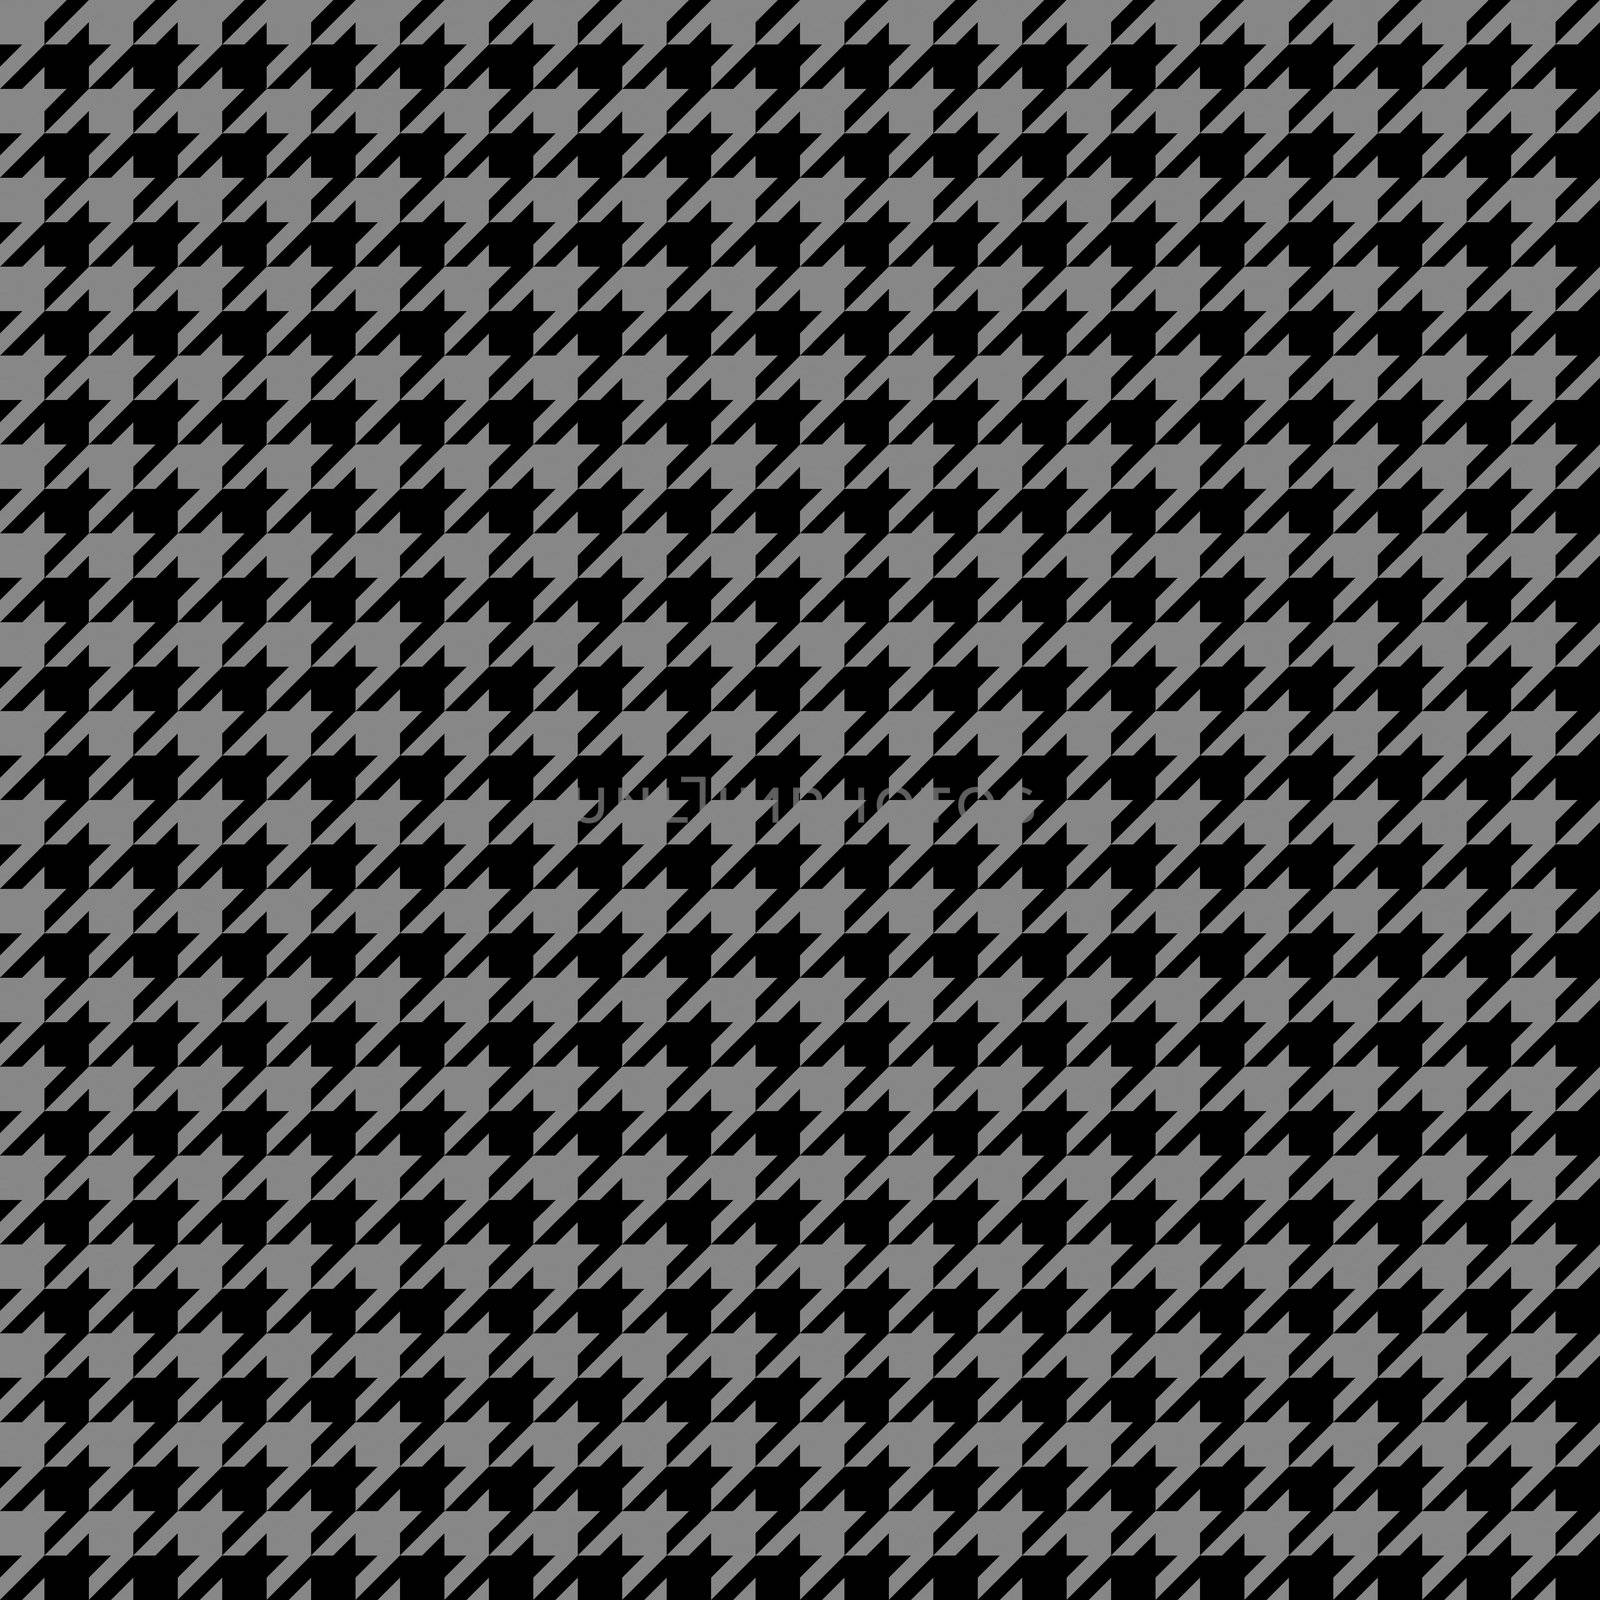 Super detailed houndstooth texture that tiles seamlessly as a pattern. 